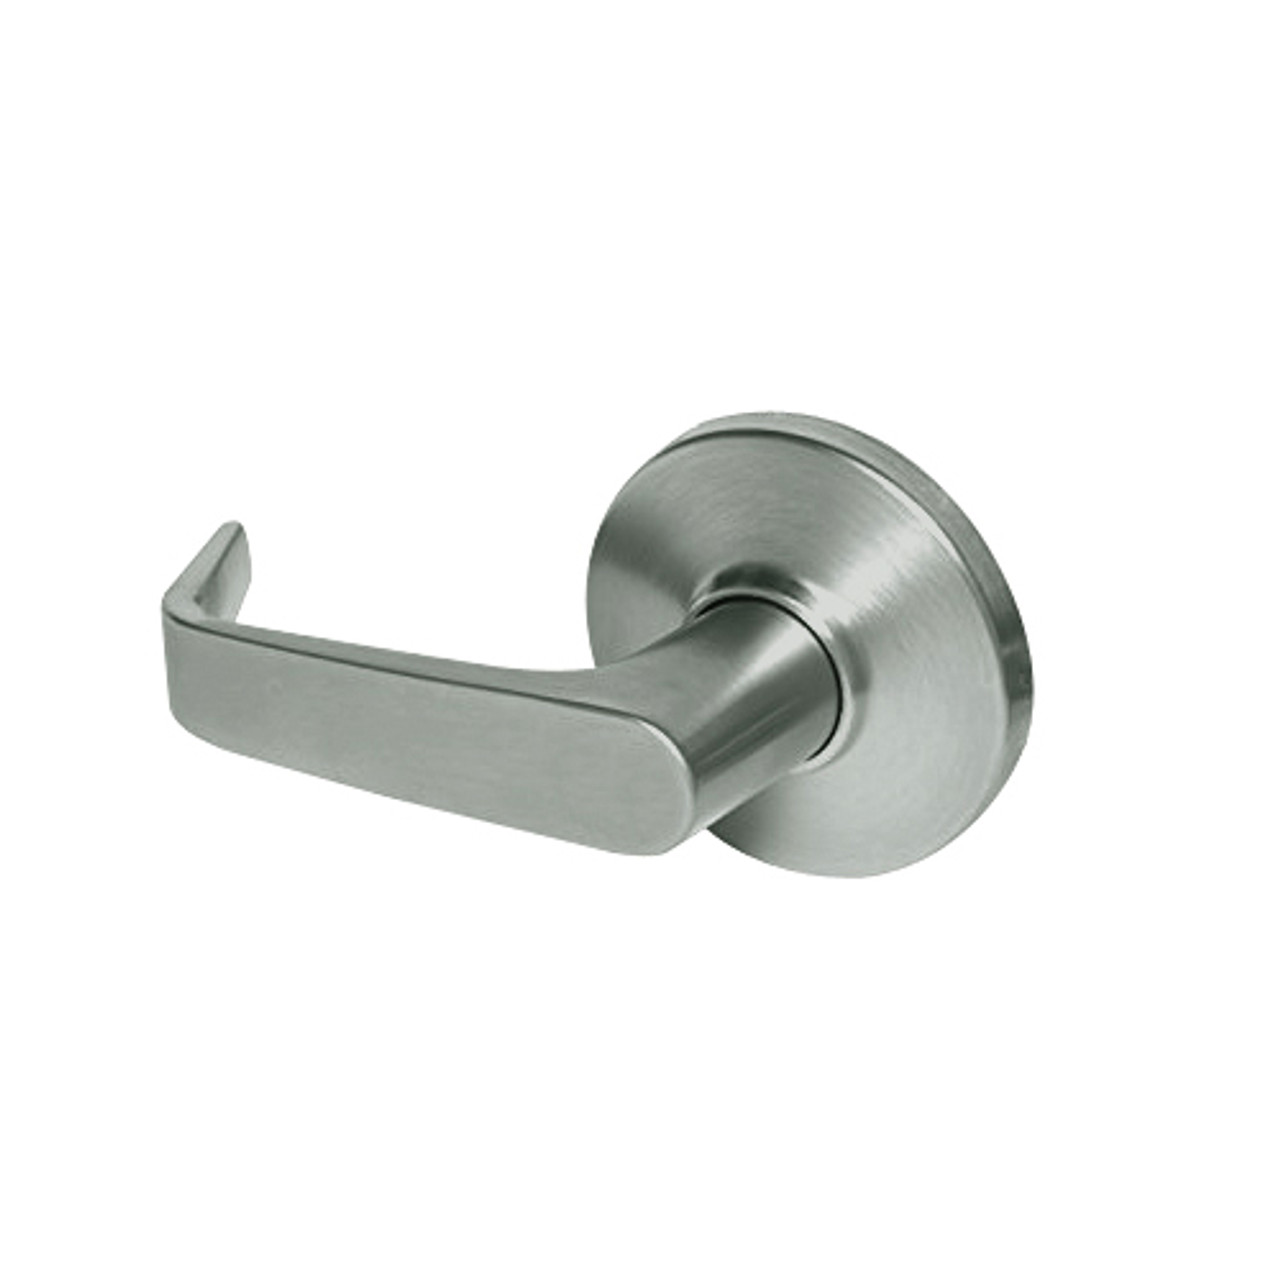 9K30LL15DSTK619 Best 9K Series Hospital Privacy Heavy Duty Cylindrical Lever Locks with Contour Angle with Return Lever Design in Satin Nickel